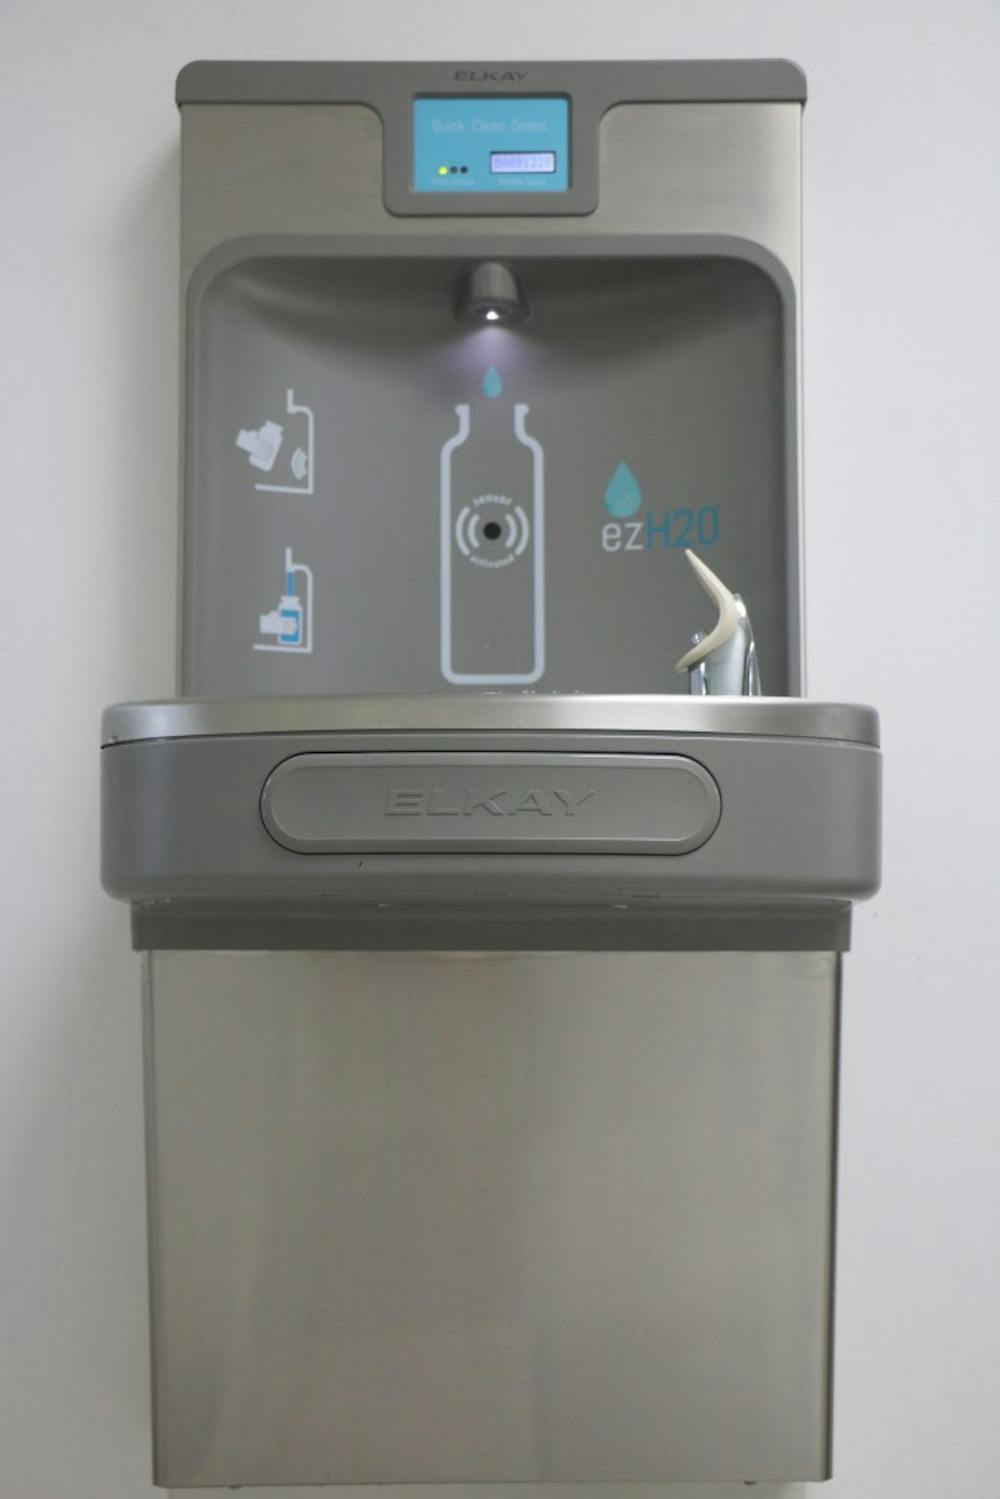 Auburn University provides weagle water filling stations all over the Auburn University Campus.